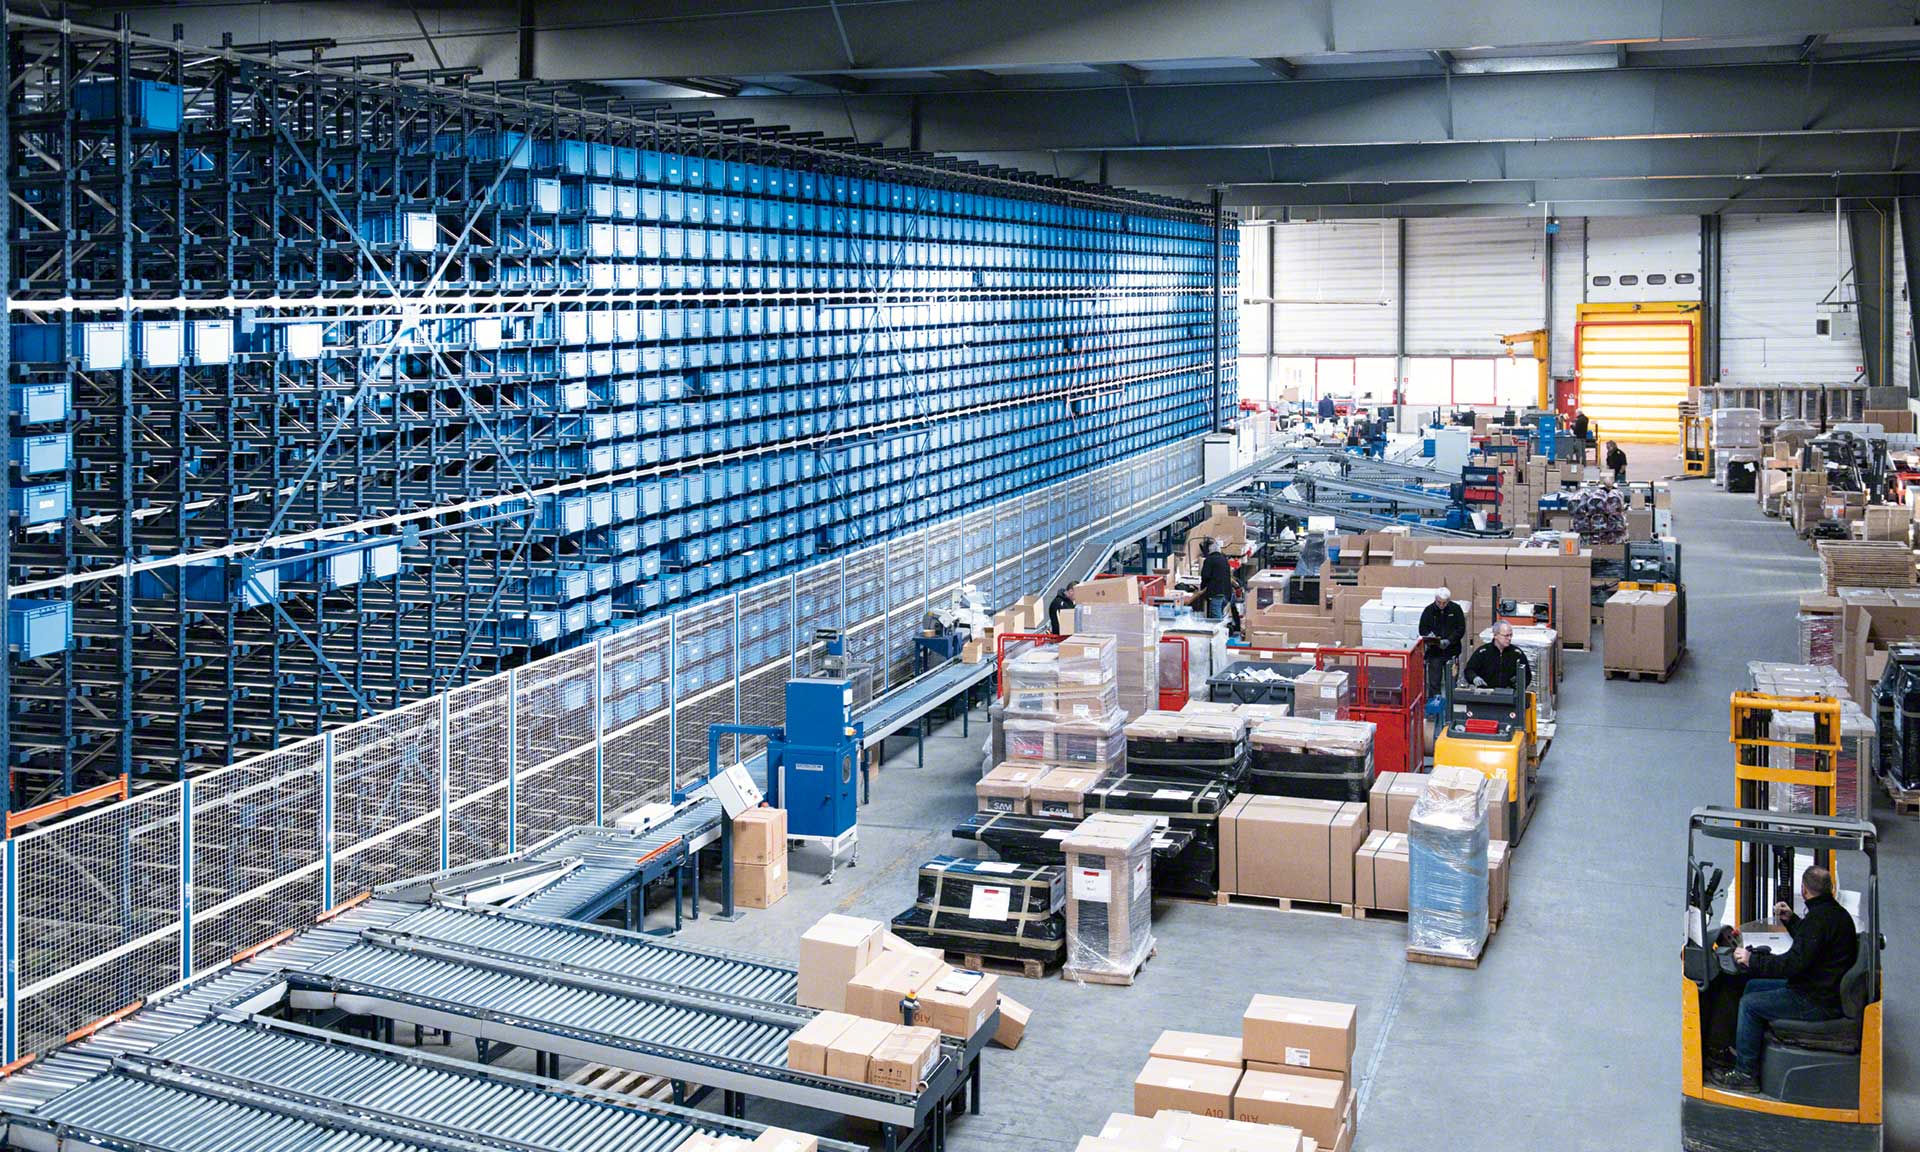 Urban warehouses are logistics facilities located inside cities to streamline deliveries of orders to end customers